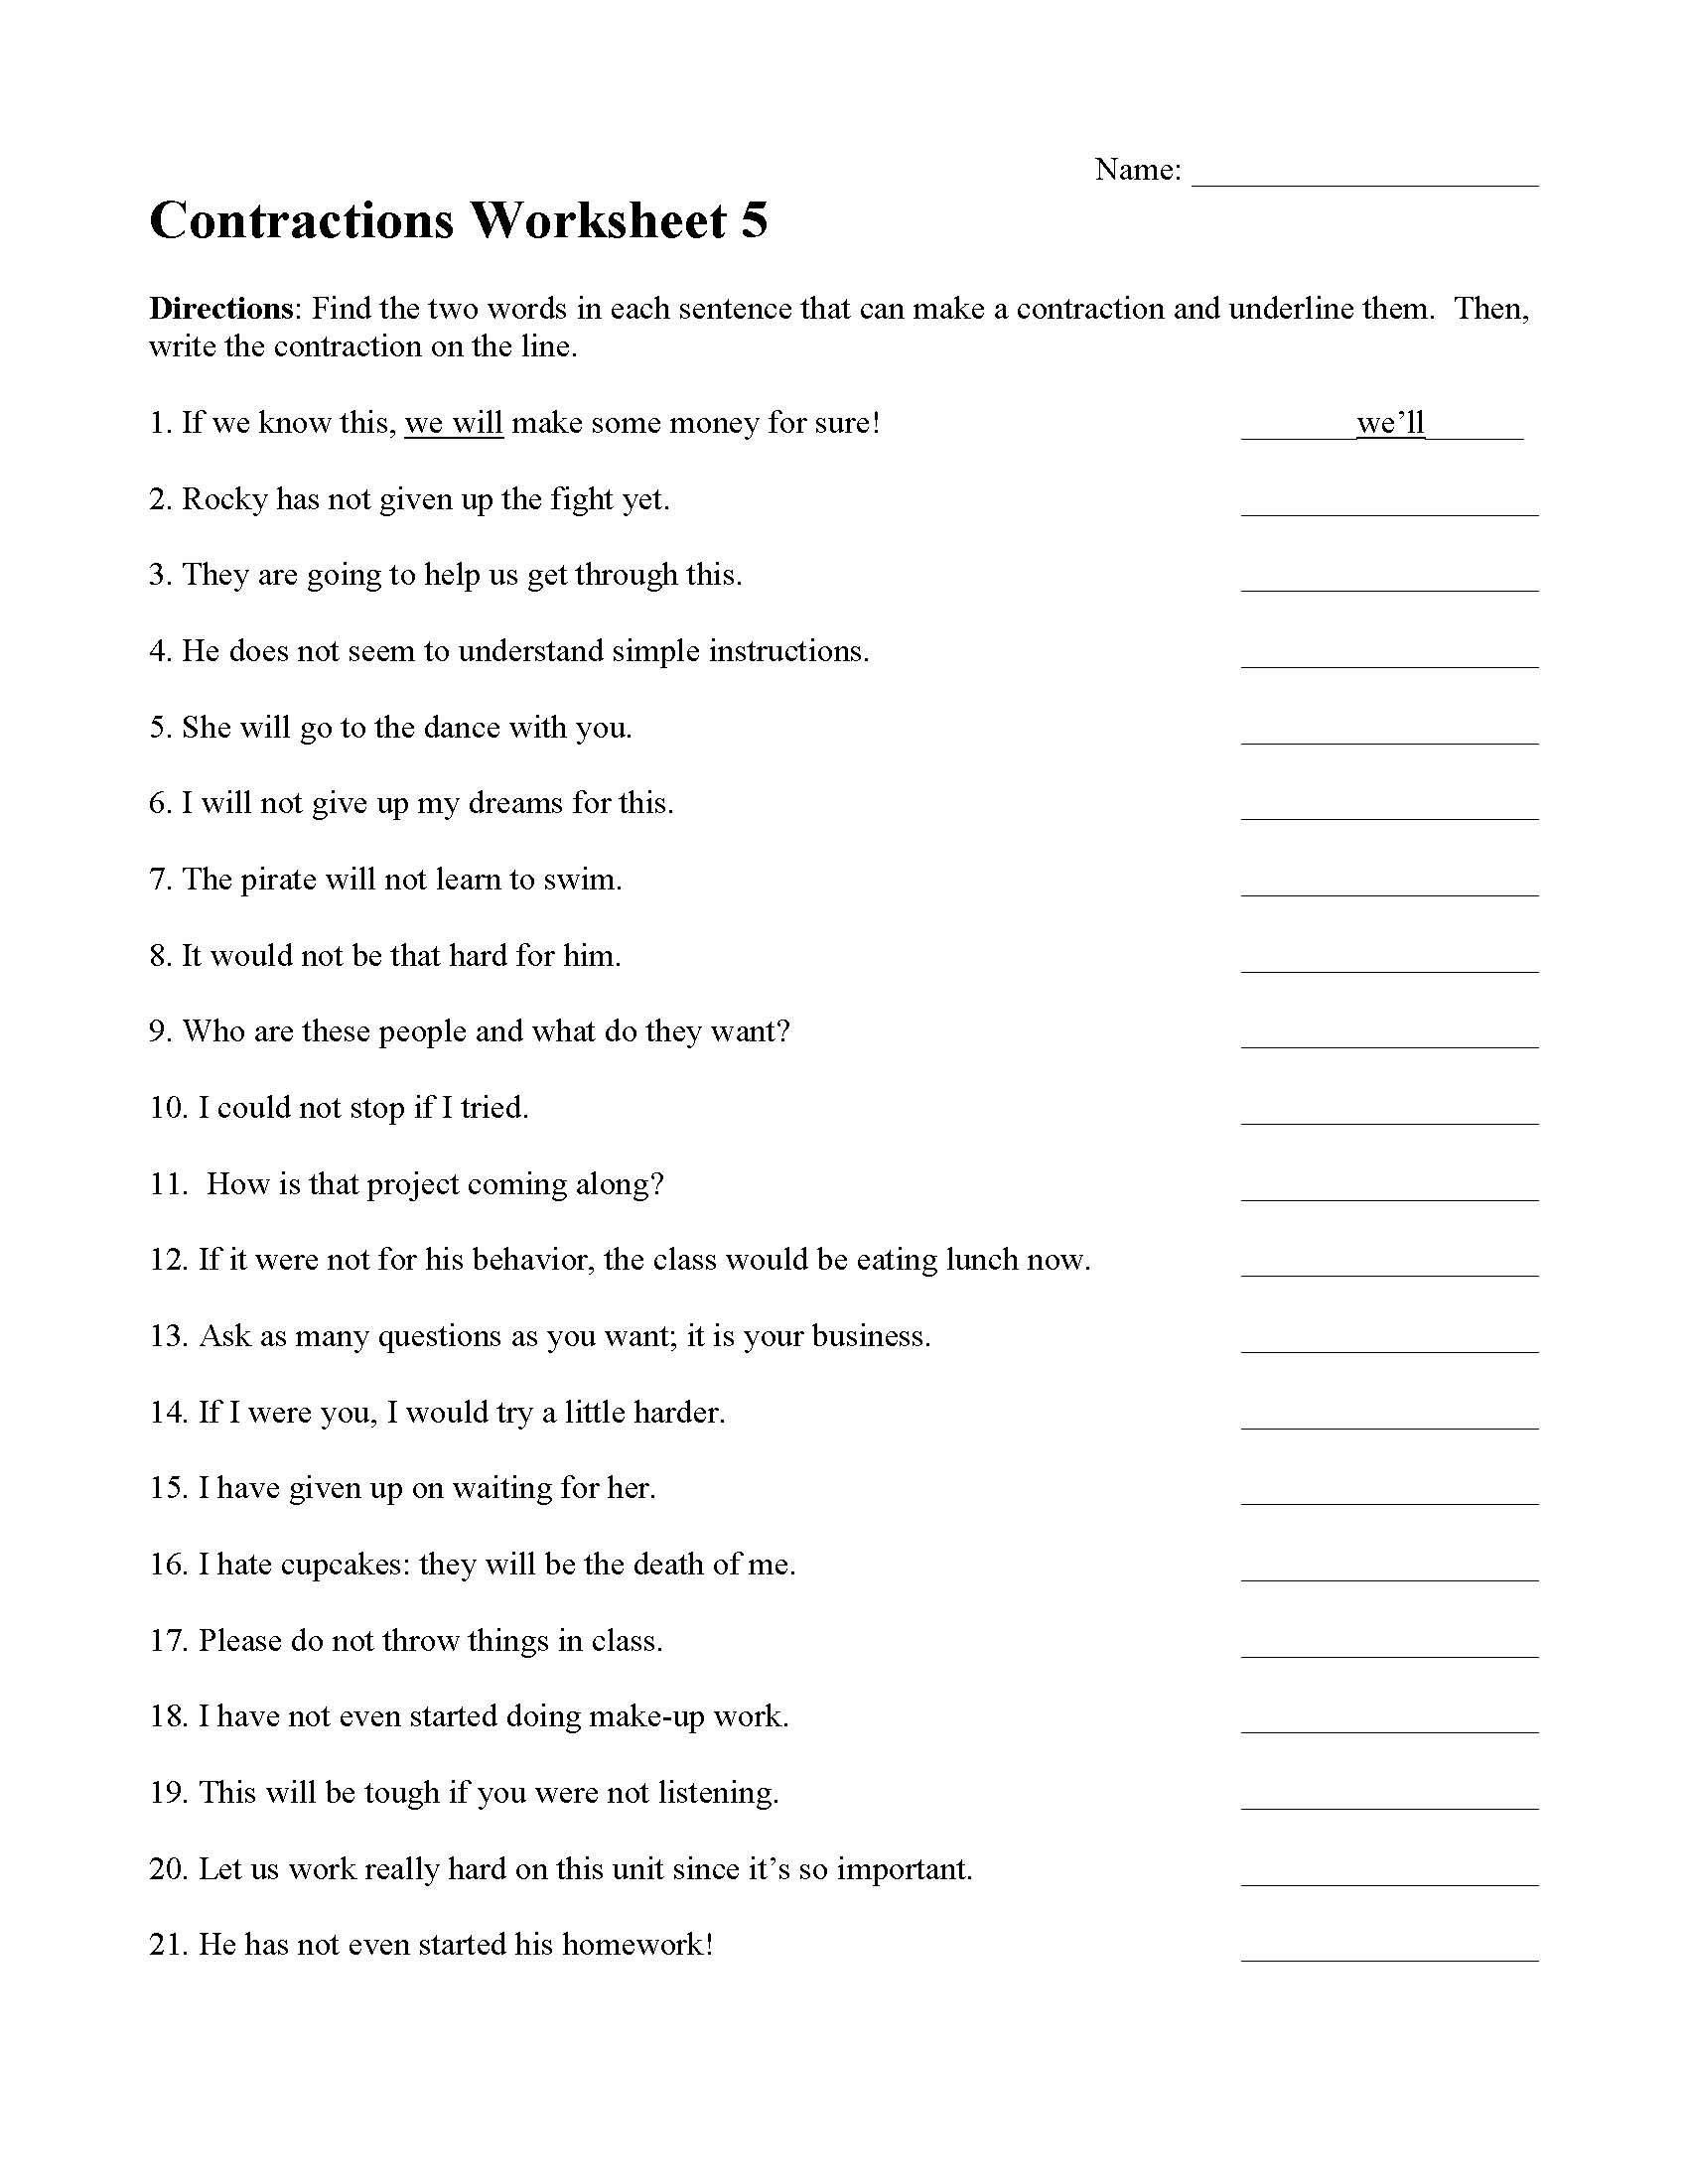 contractions-worksheet-5-preview